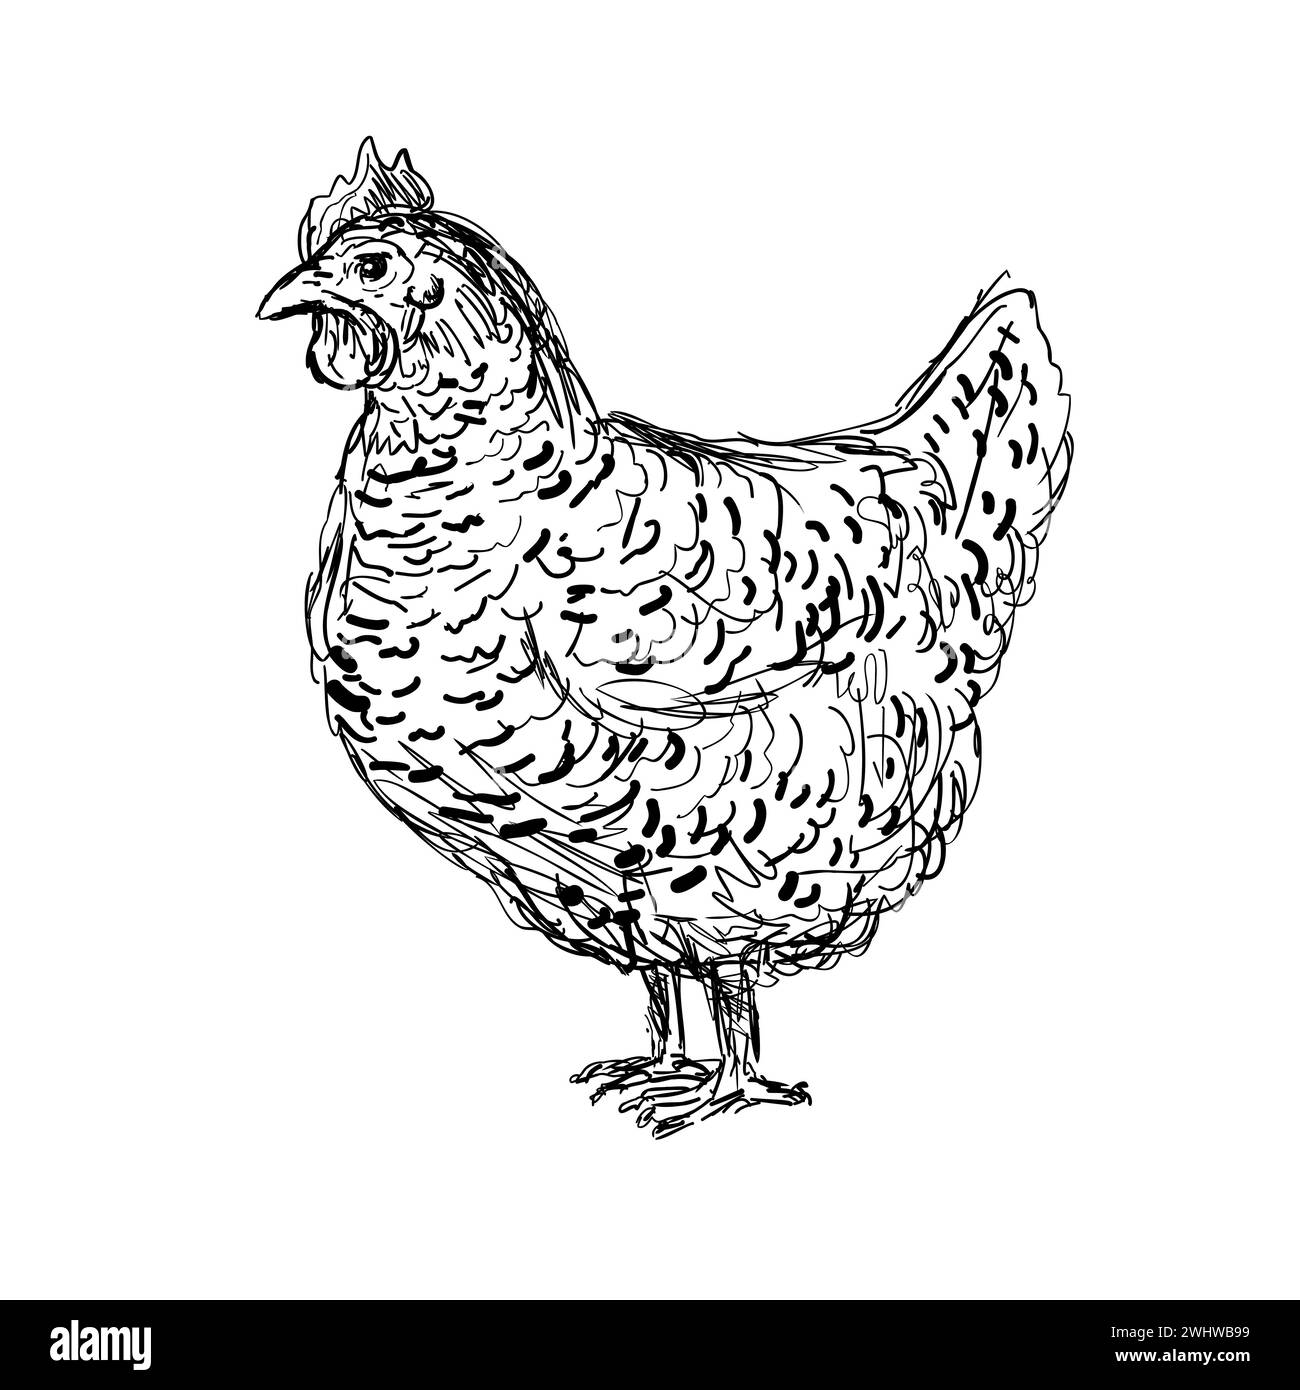 Plymouth Rock Chicken or Hen Side View Drawing Stock Photo